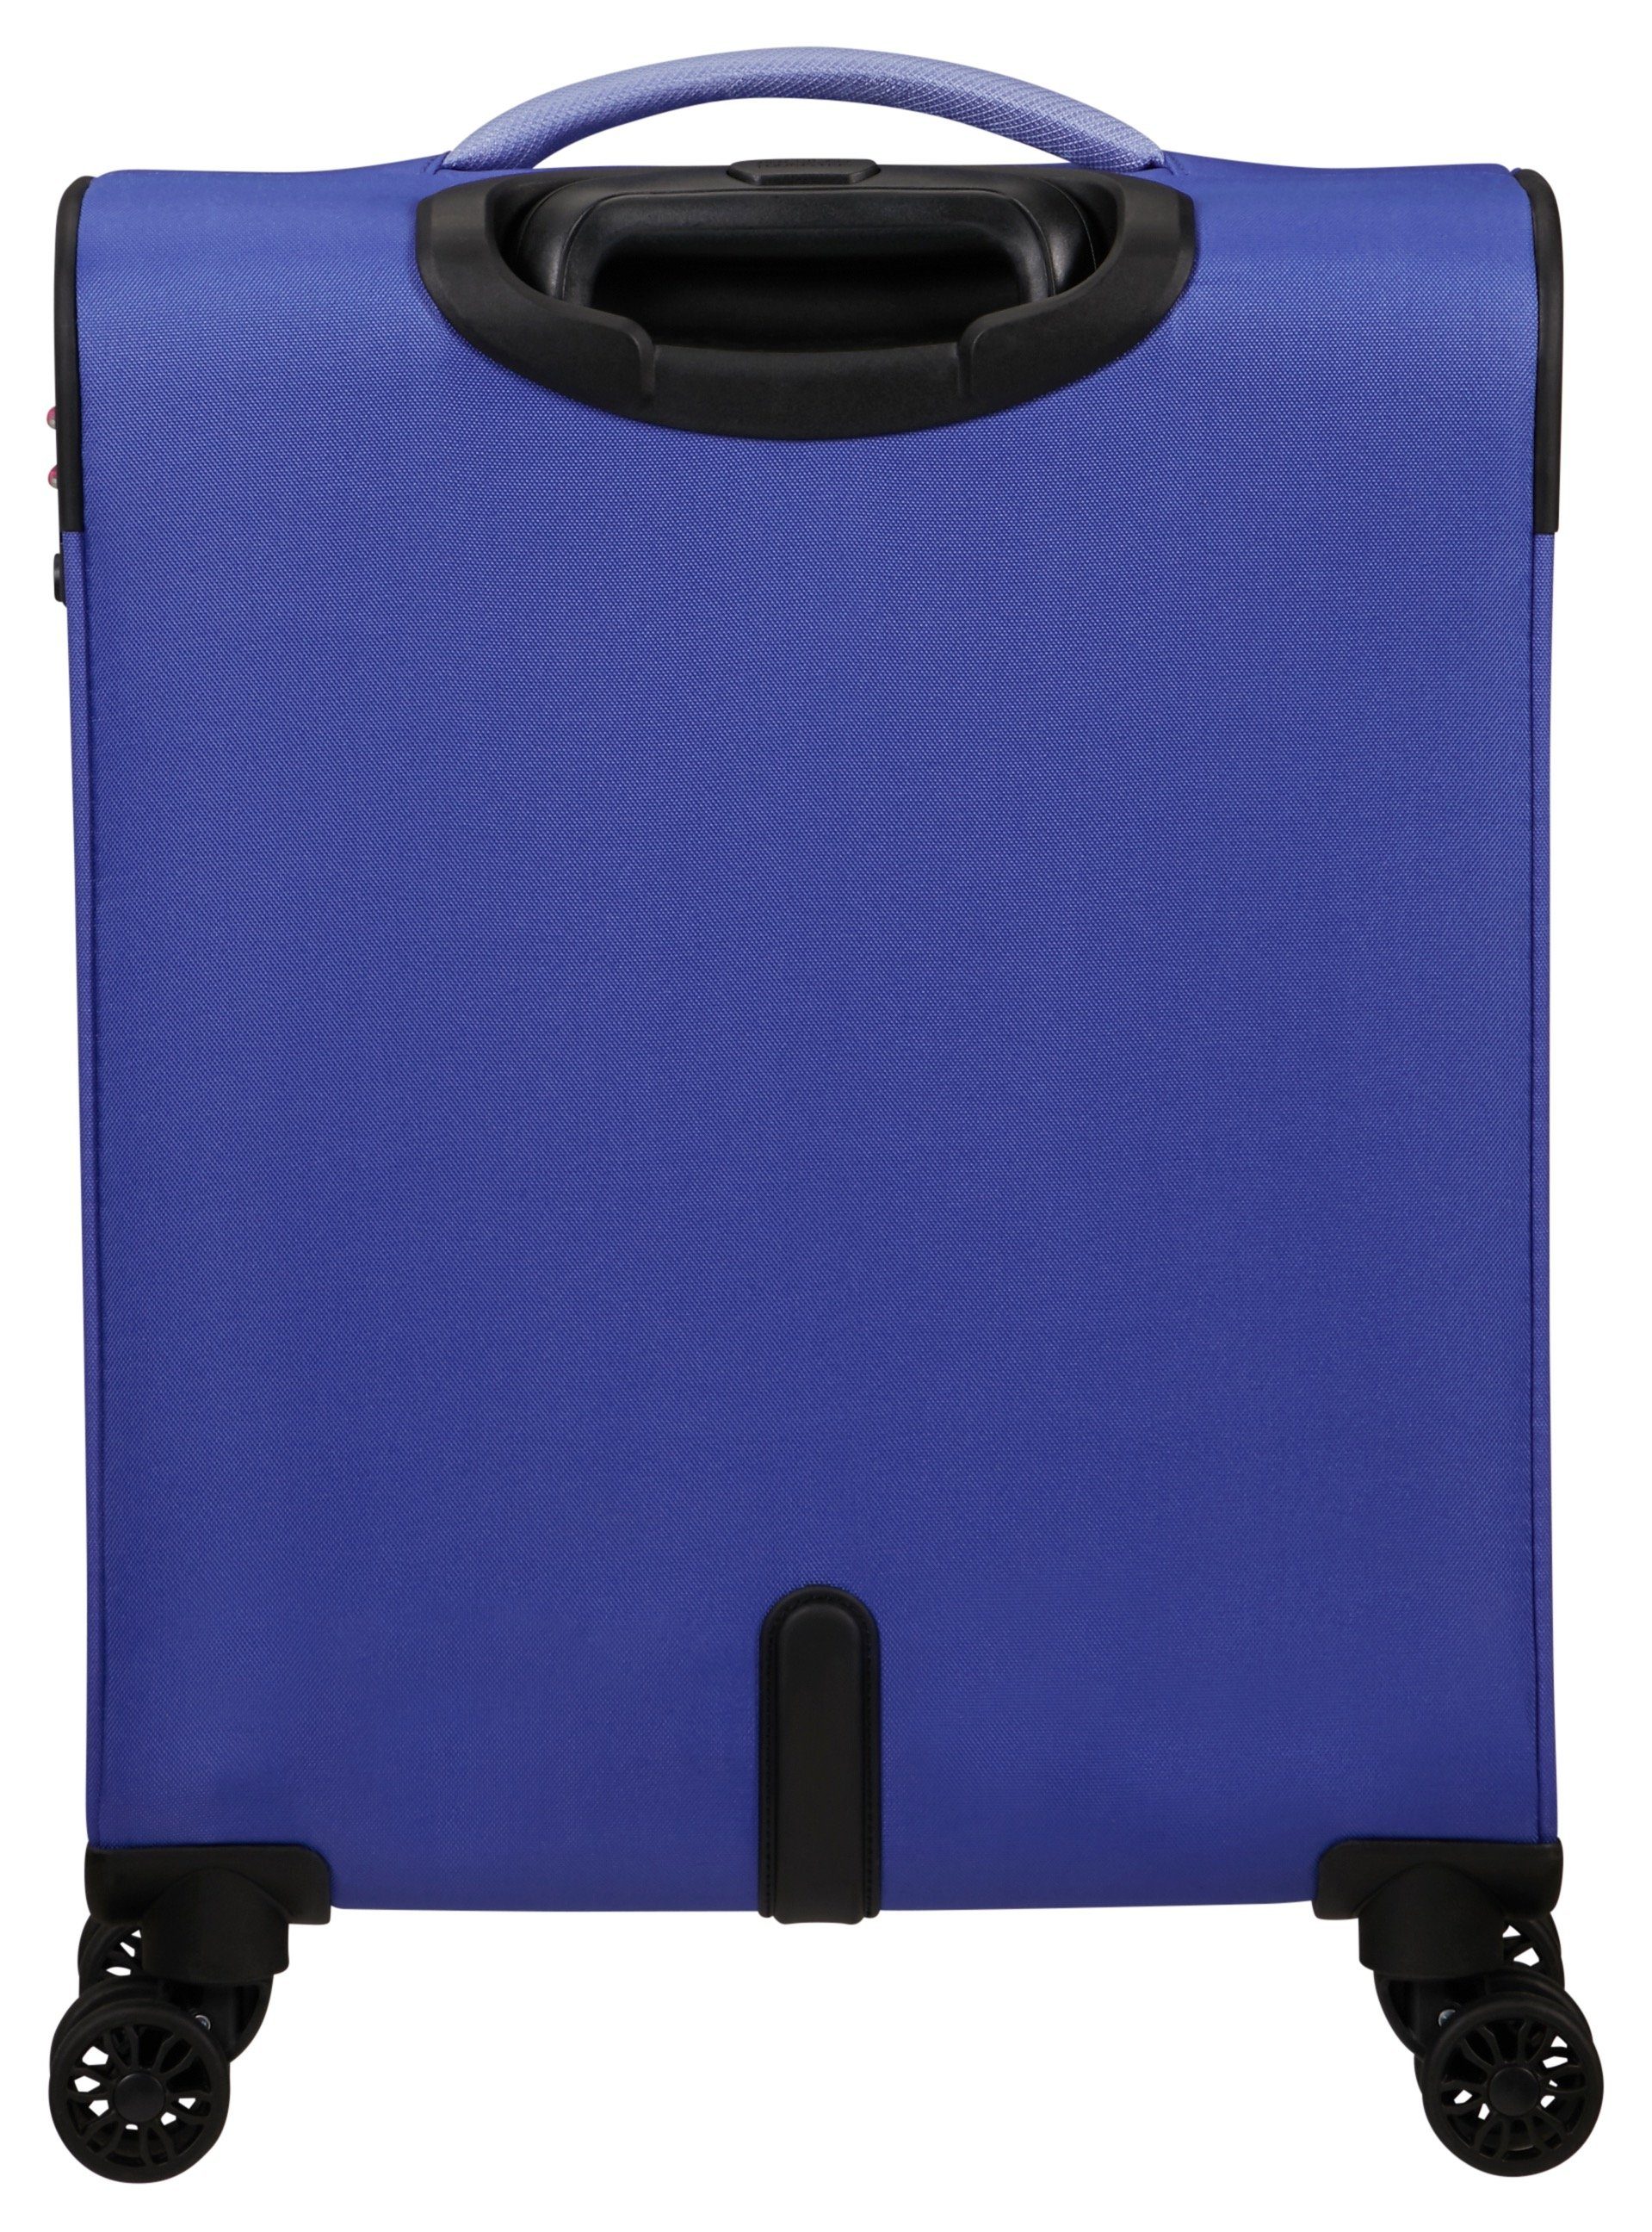 4 American Koffer Spinner soft Rollen lilac PULSONIC 55, Tourister®